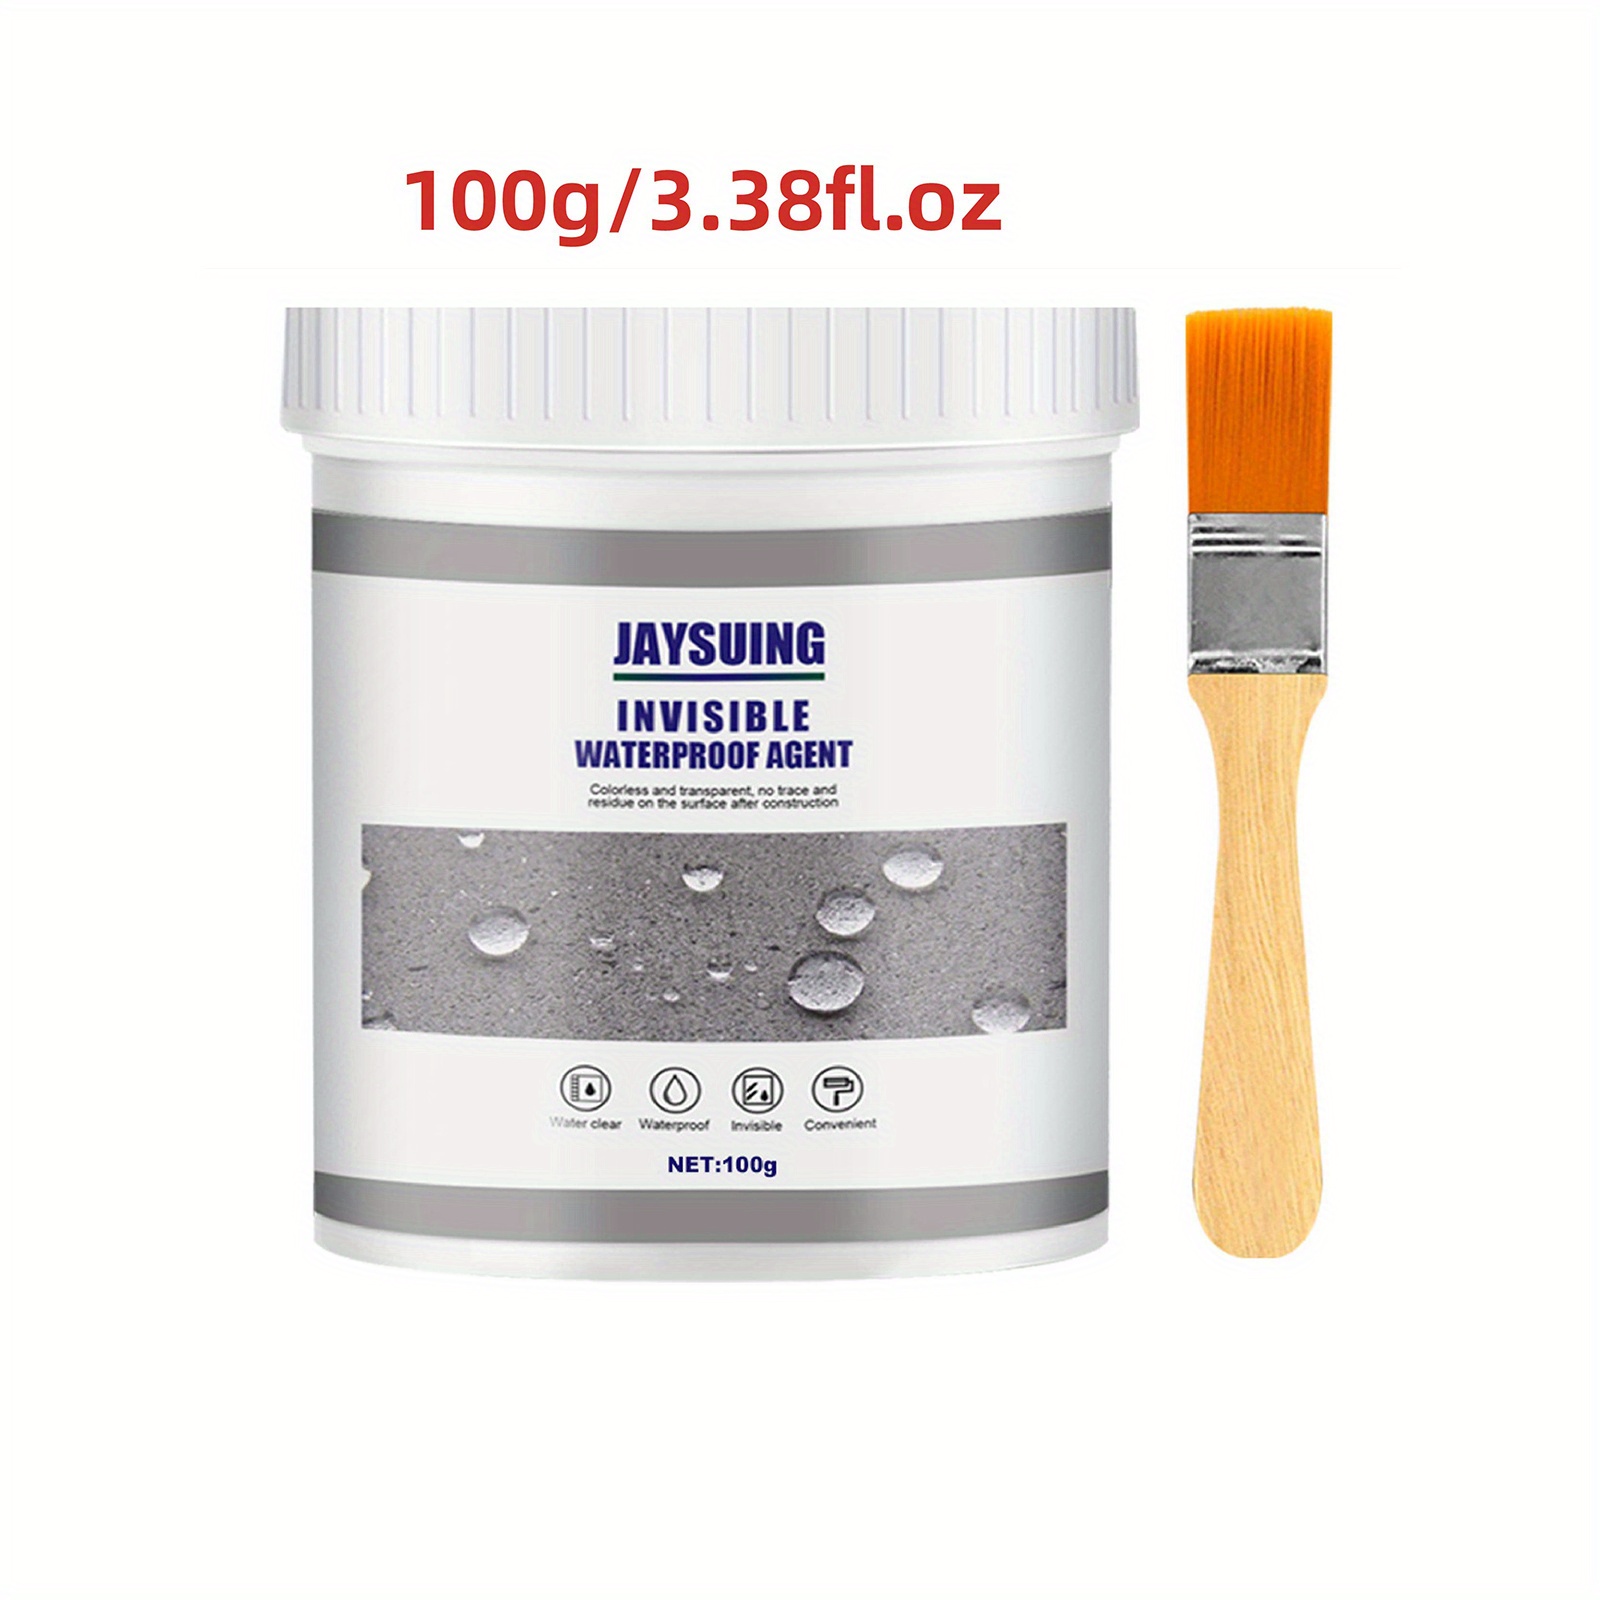 US Invisible Waterproof Agent Insulating Sealant Anti-Leakage